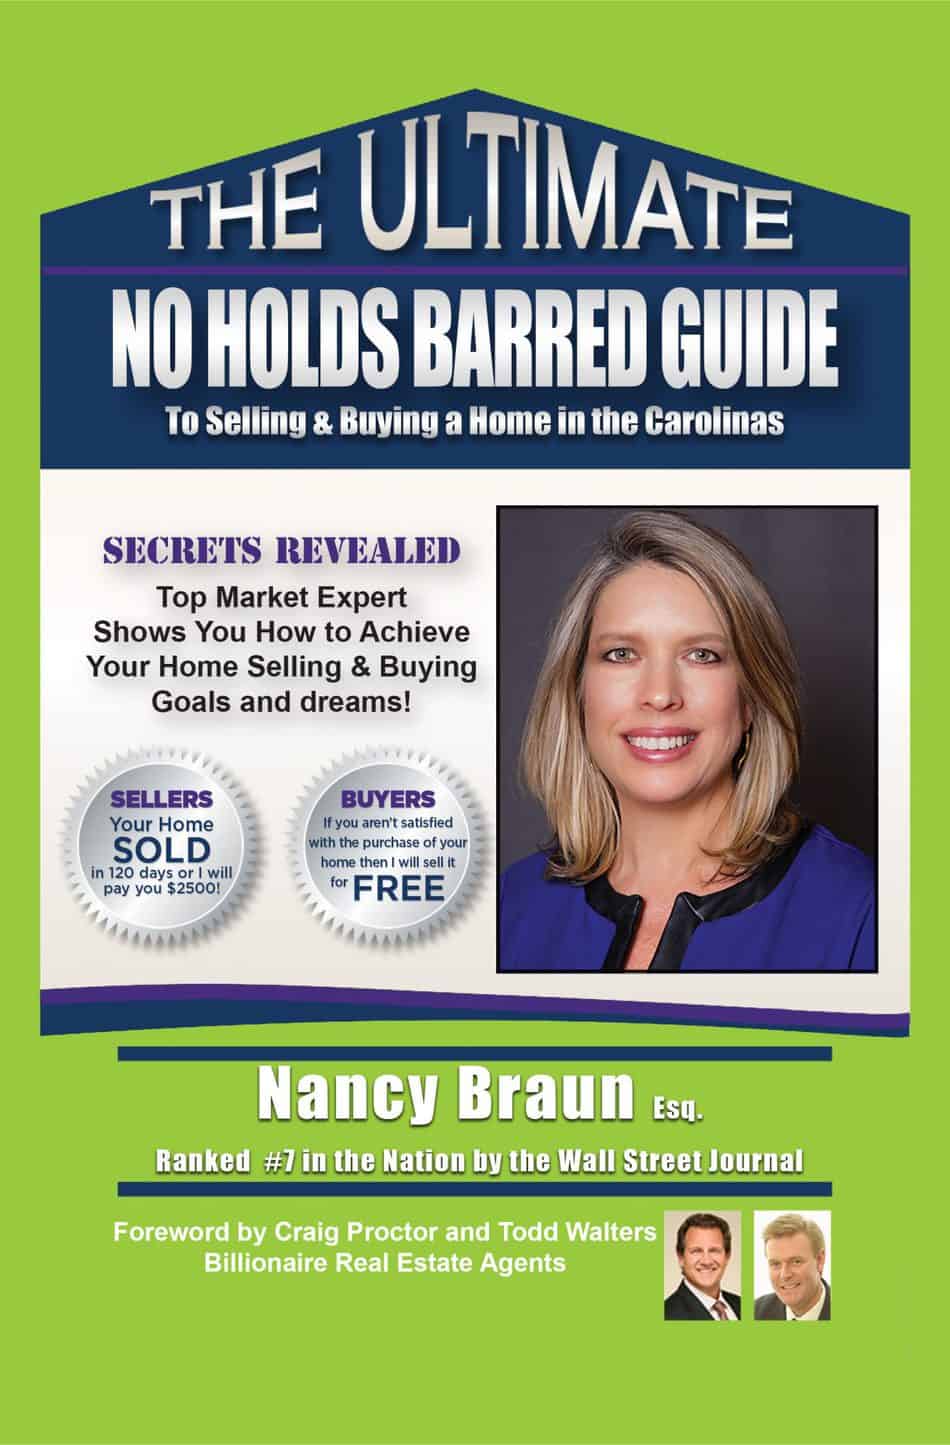 Nancy Braun Published book The Ultimate No Hold Barred Guide to selling and buying a home in the Carolinas